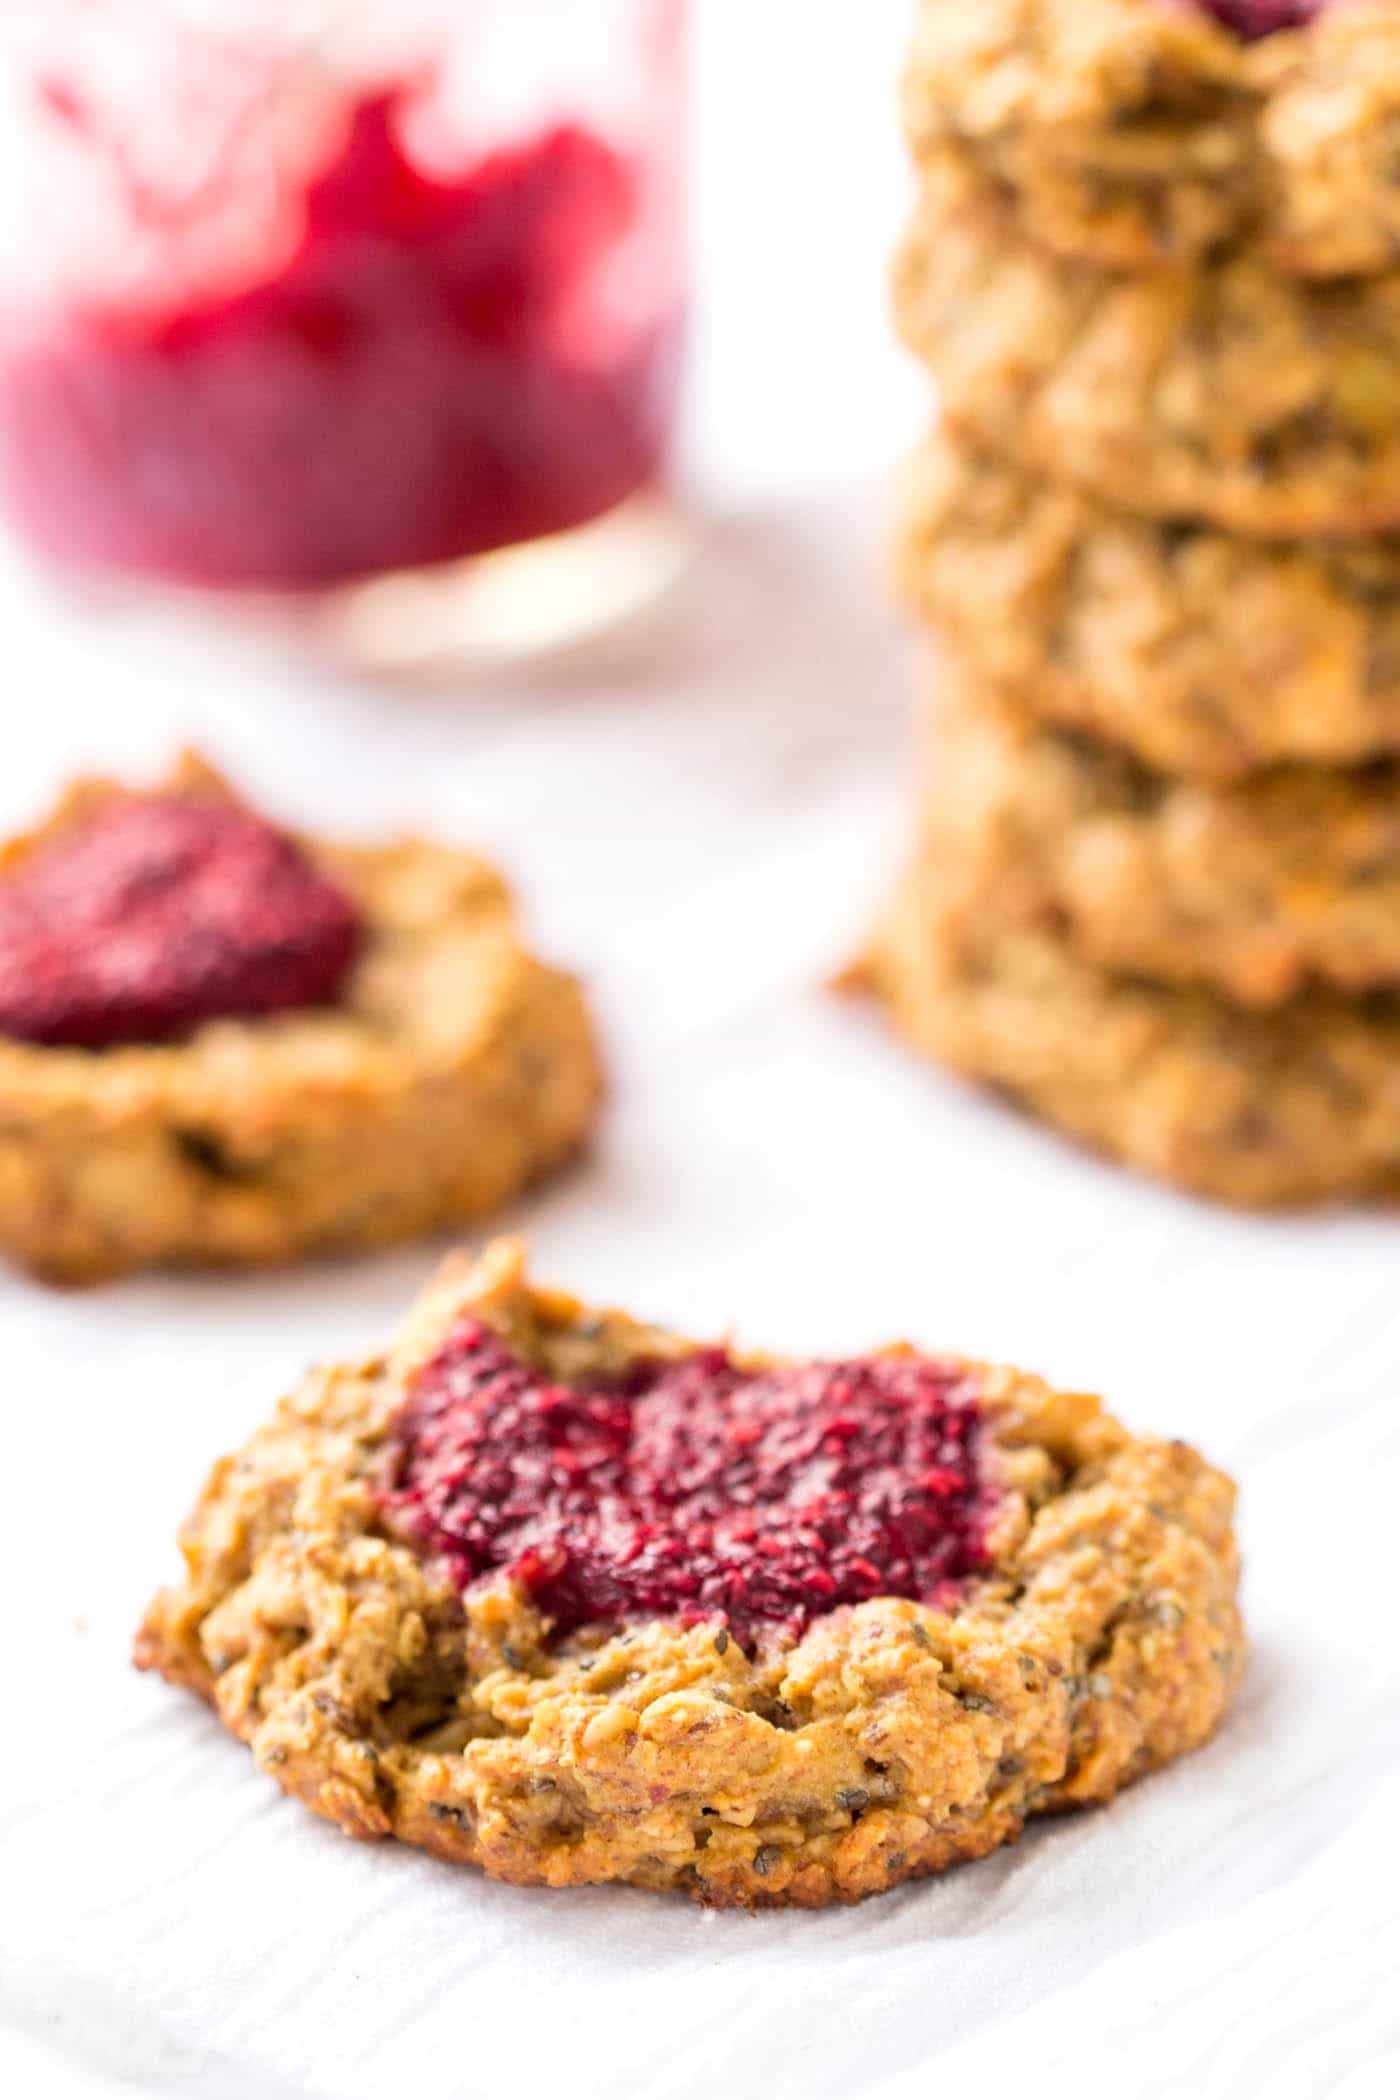 The best flavor combo? Peanut Butter + Jelly...this time combined to make a delicious (and healthy!) breakfast cookie - using quinoa, oats, banana and tons of other goodies